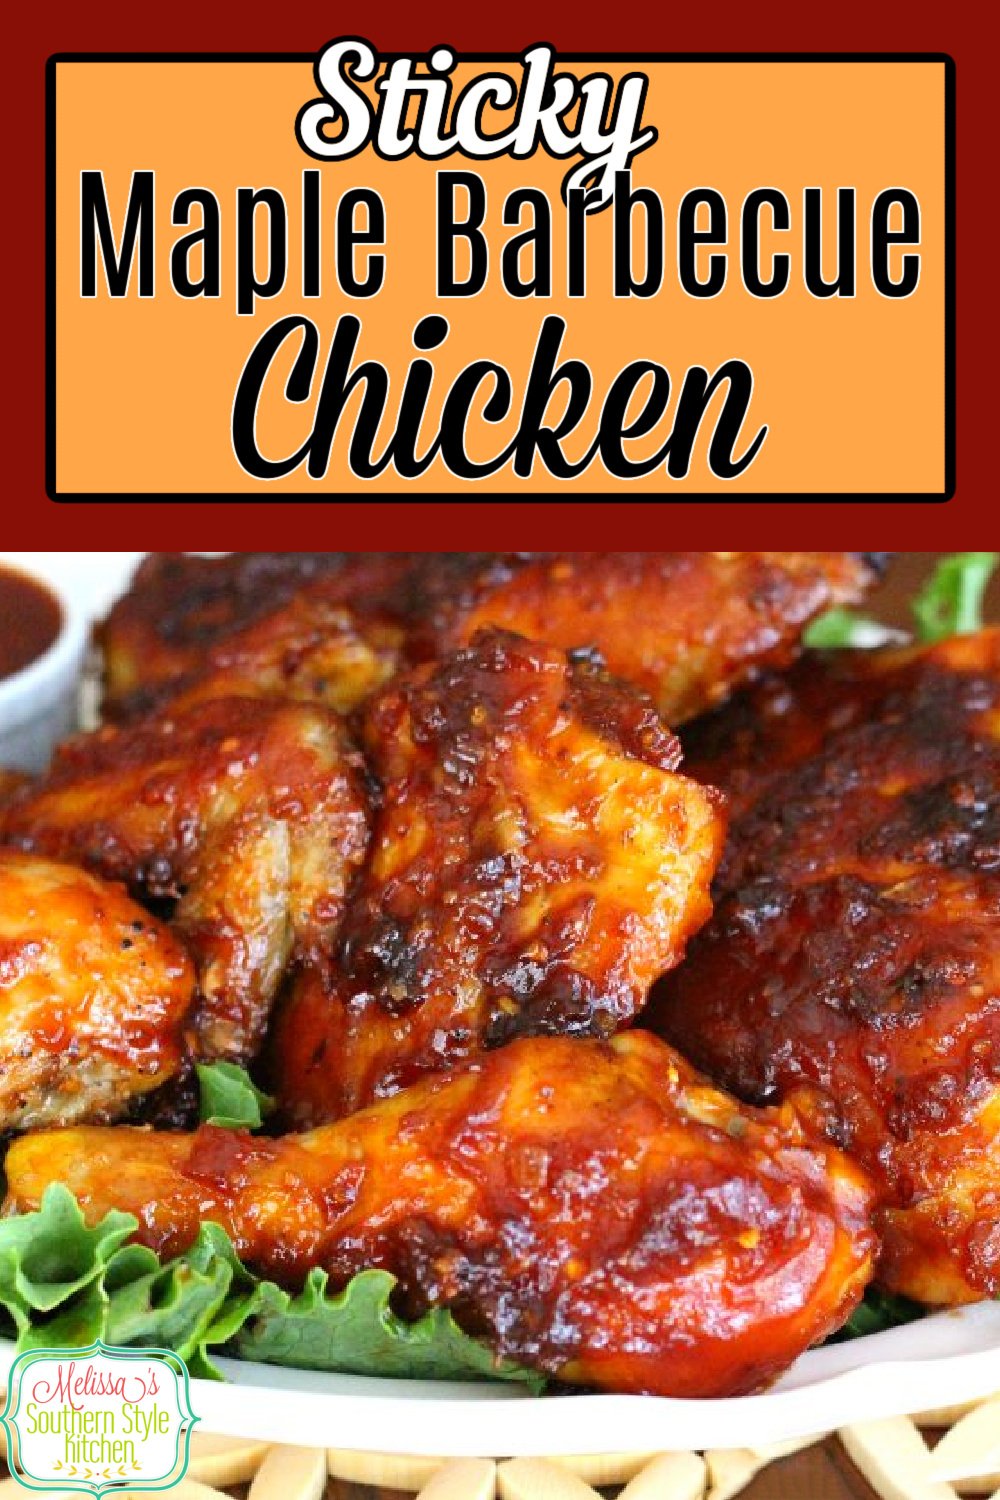 This Sticky Maple Barbecue Chicken is basted with a homemade sweet and spicy sauce that chars to perfection in the oven #bbq #bbqchicken #maplebarbecuechicken #bakedchicken #chickenbreastrecipes #easychickenrecipes #southernchickenrecipes via @melissasssk